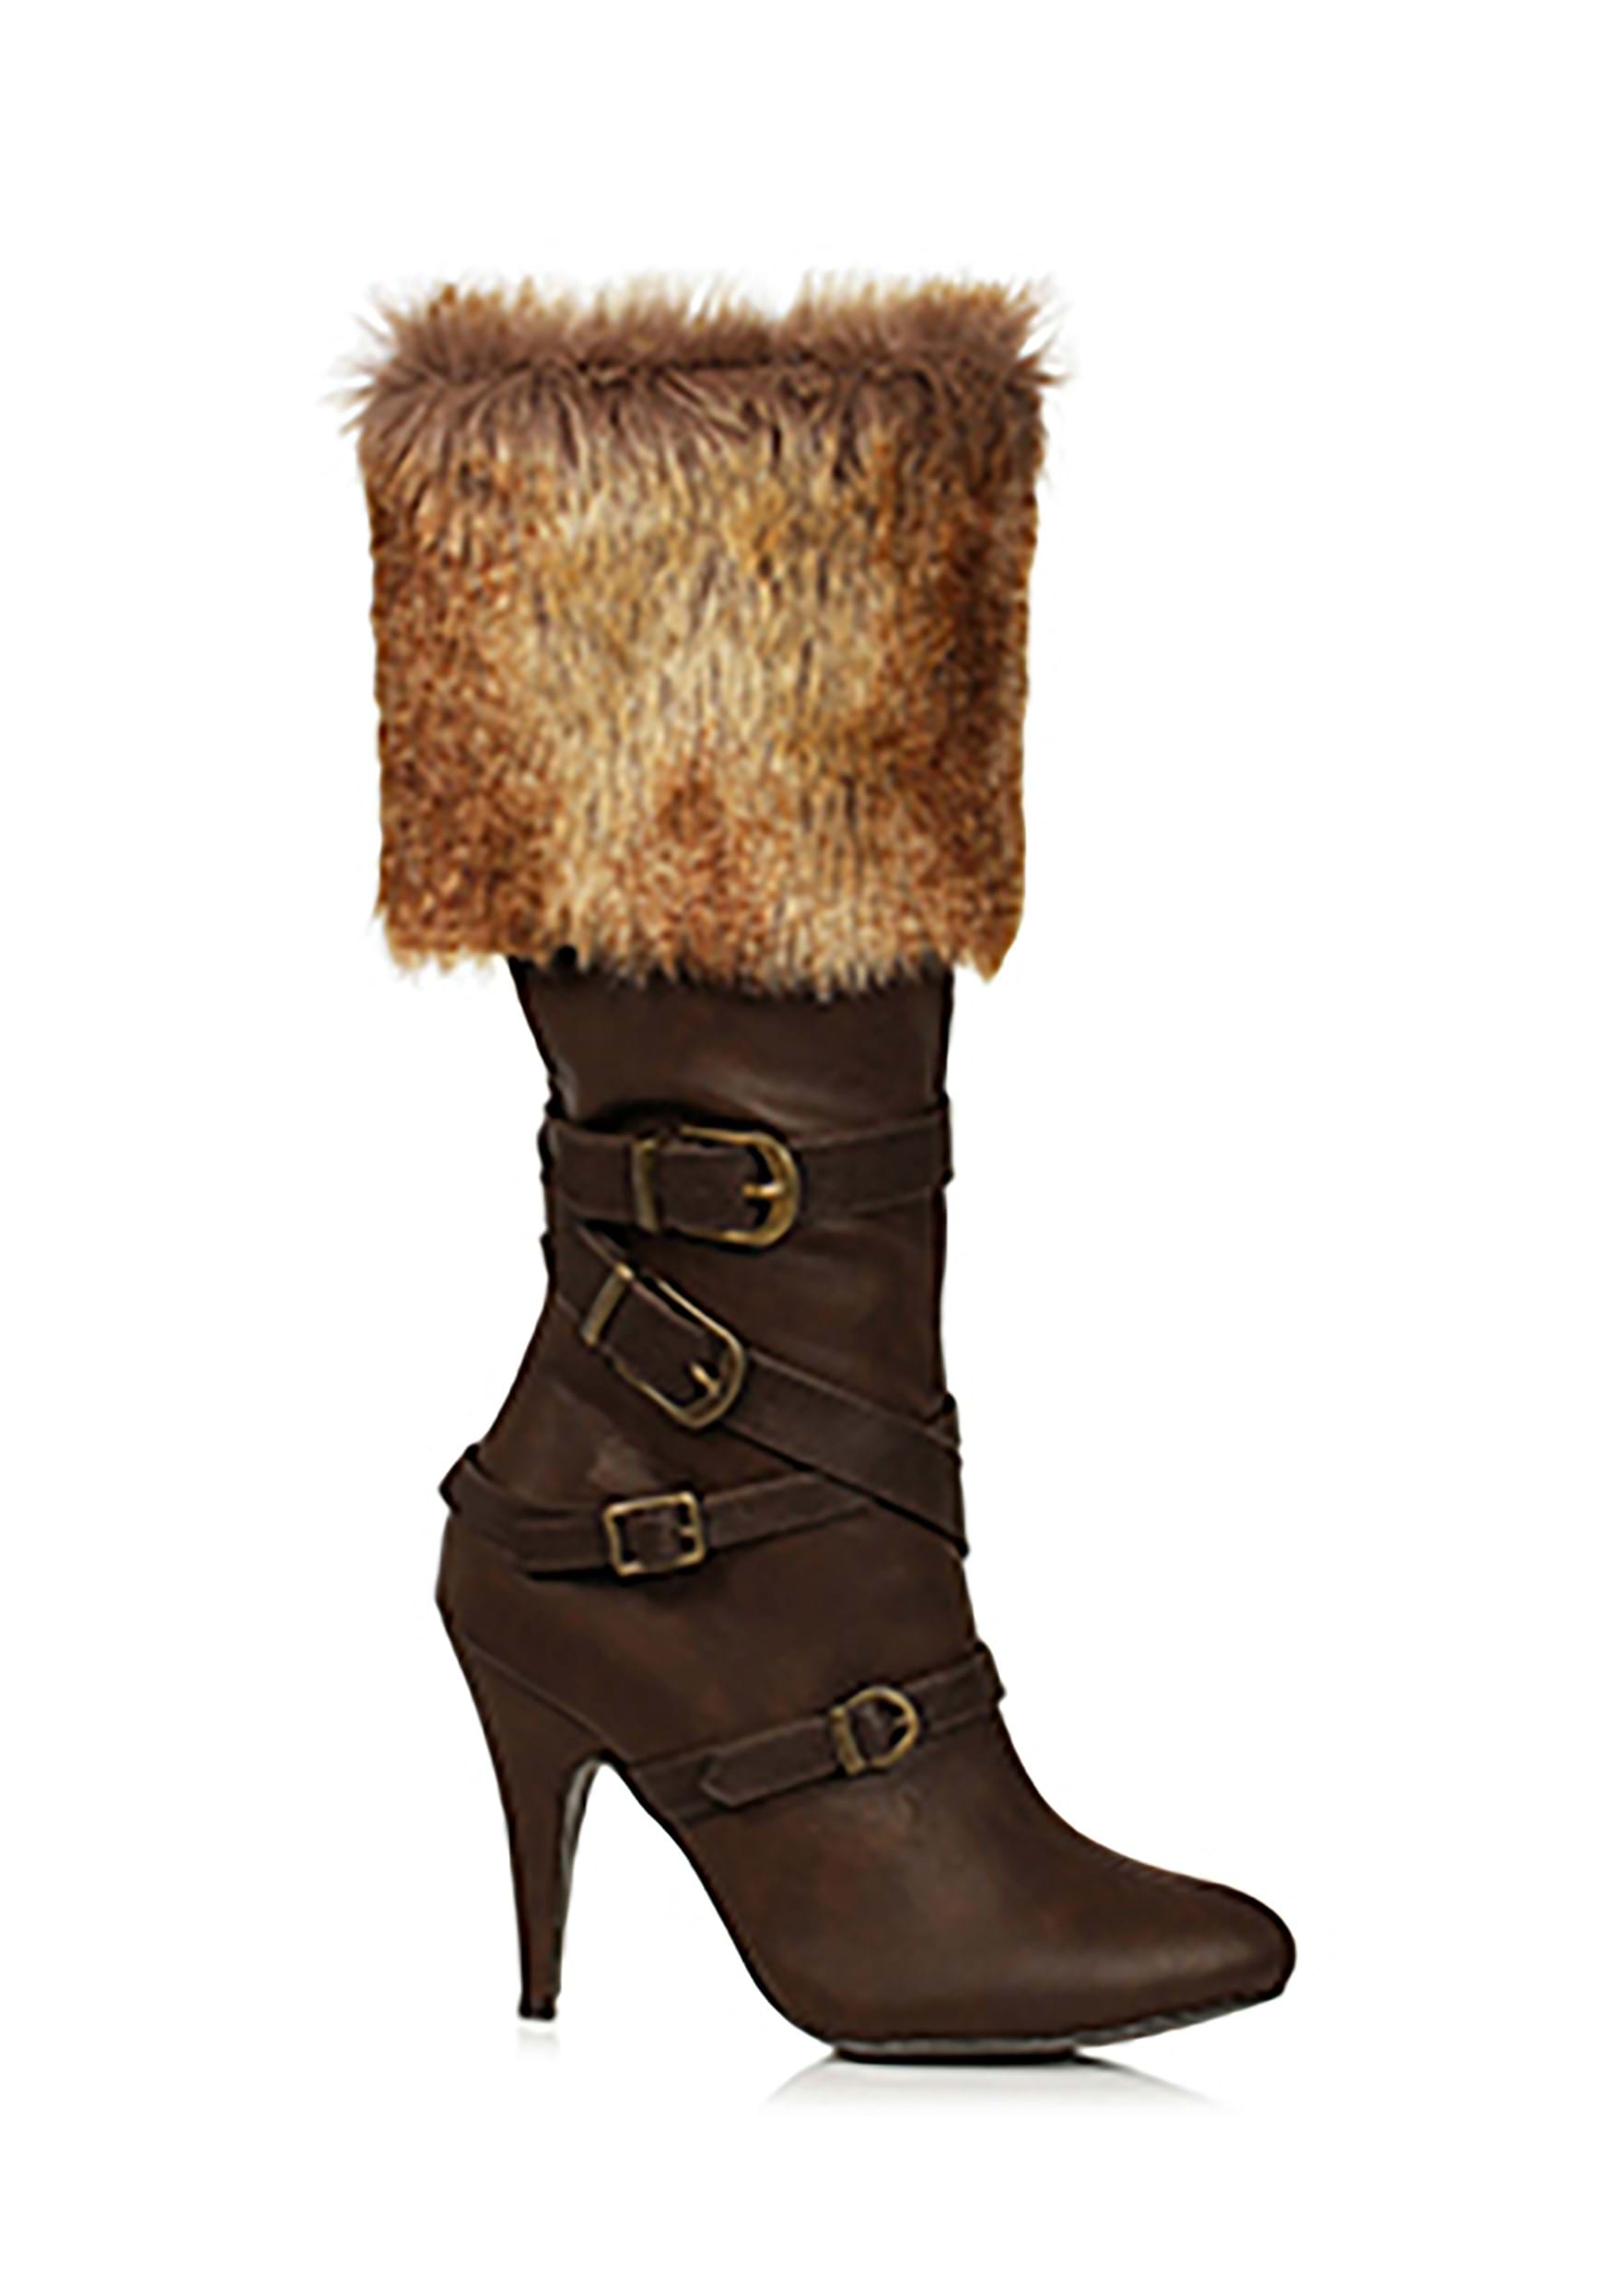 Image of Fur Trimmed Women's Viking Boots ID EE417GRETABR-6